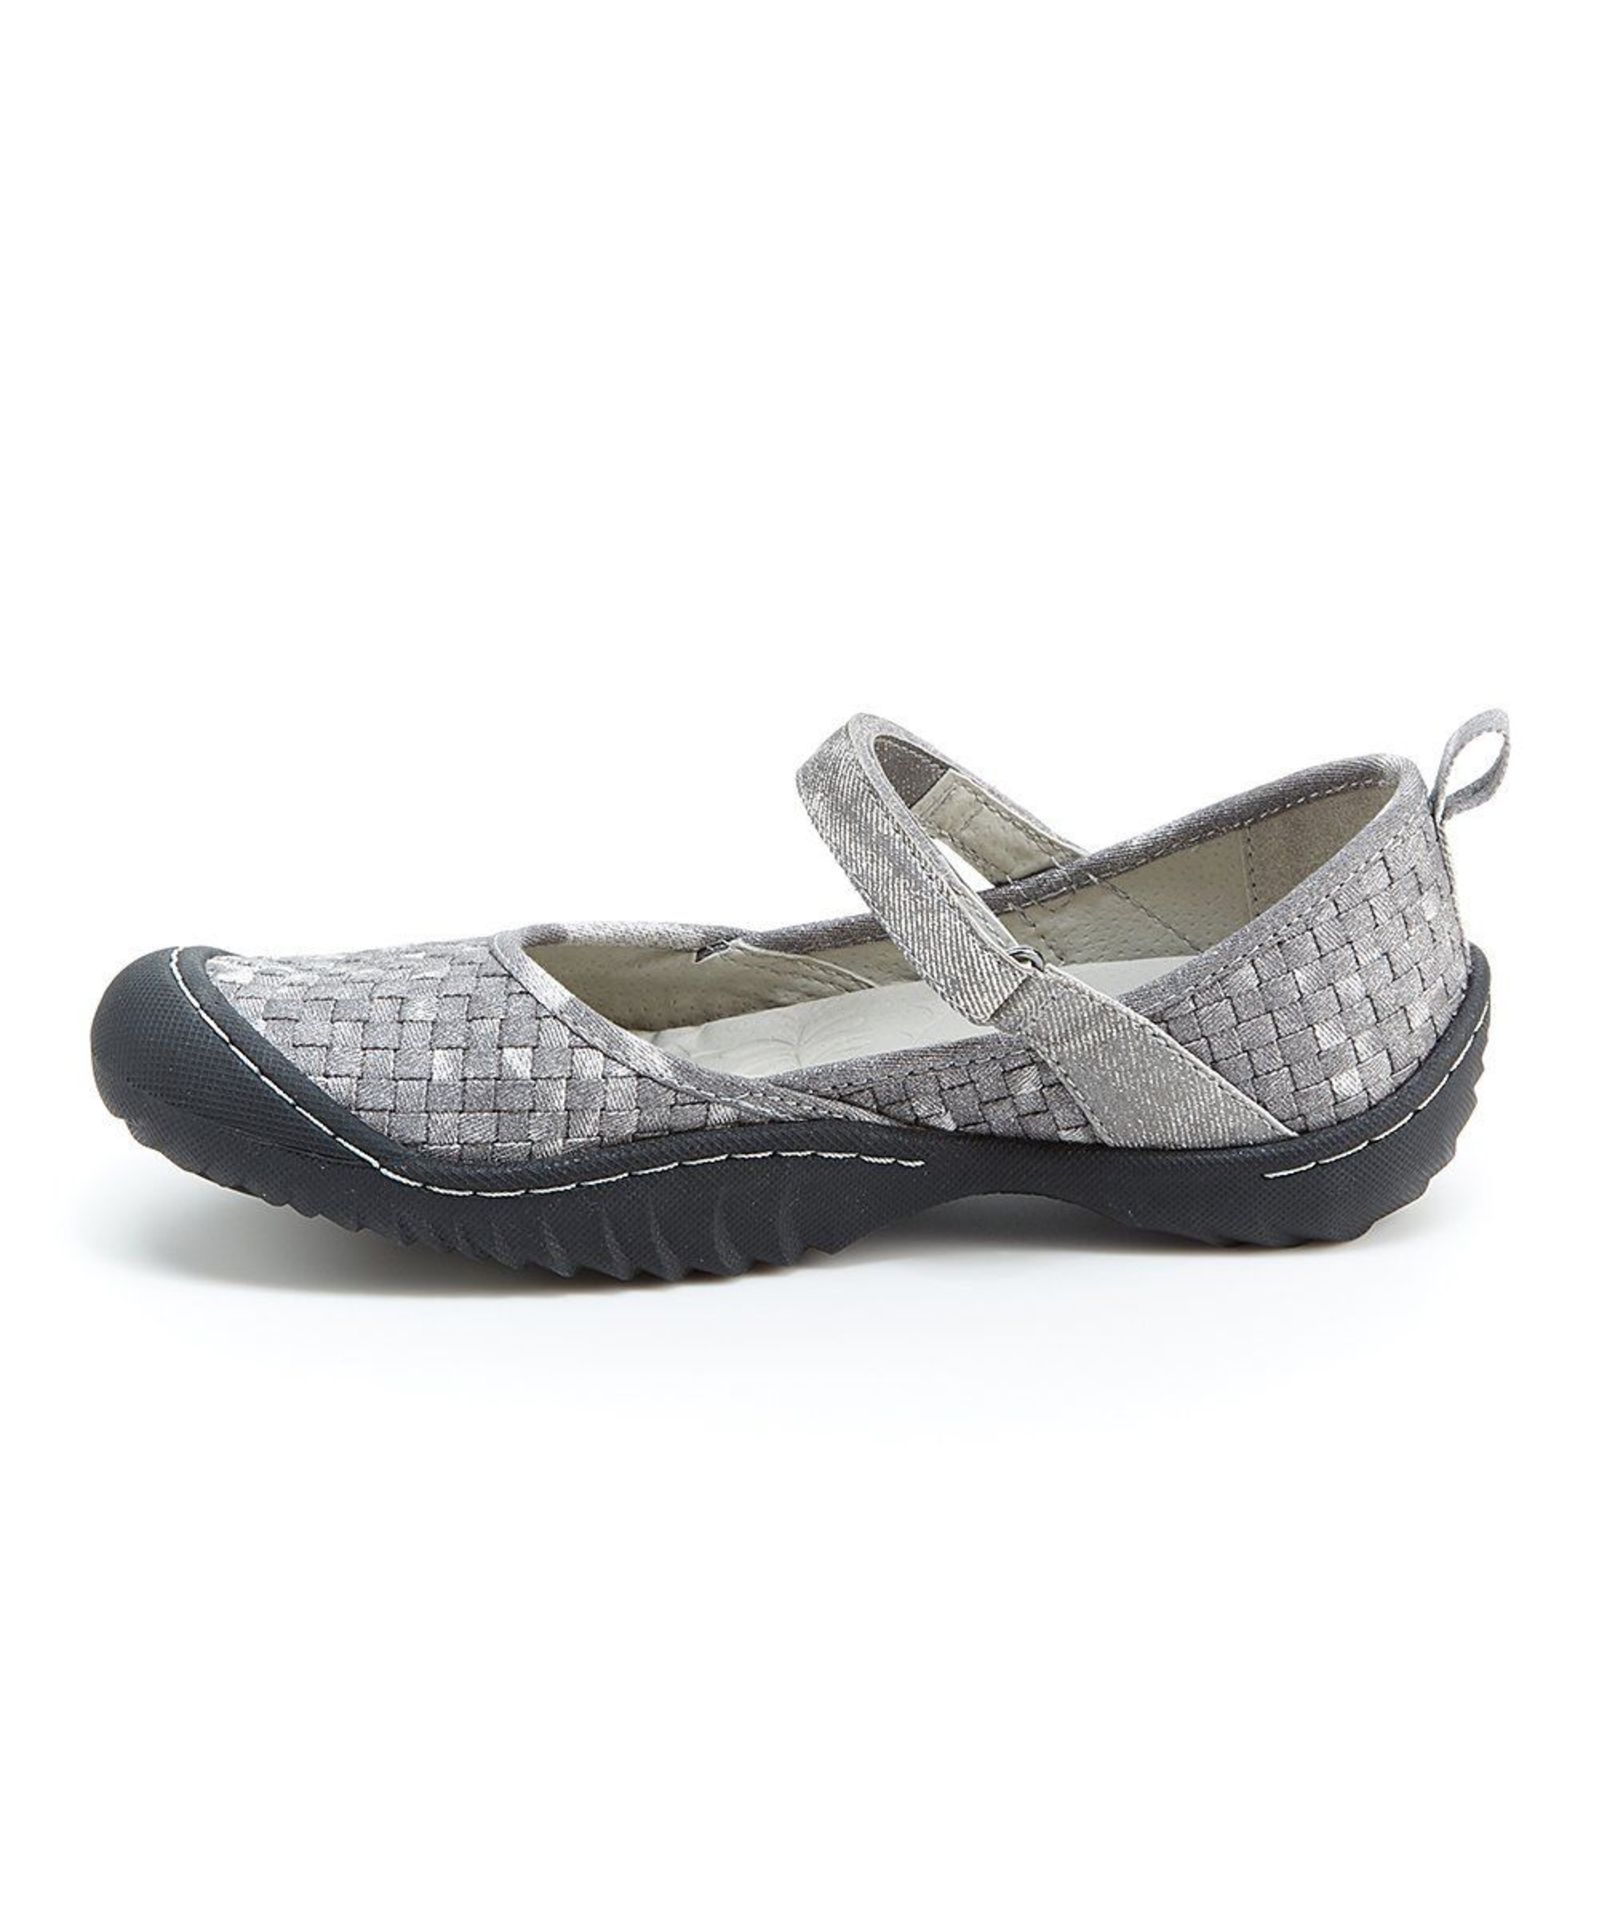 JSport Gunmetal Cara Mary Janes (UK Size: 5.5/US Size: 7.5) (New with box) [Ref: 52456078-F-002] - Image 2 of 3